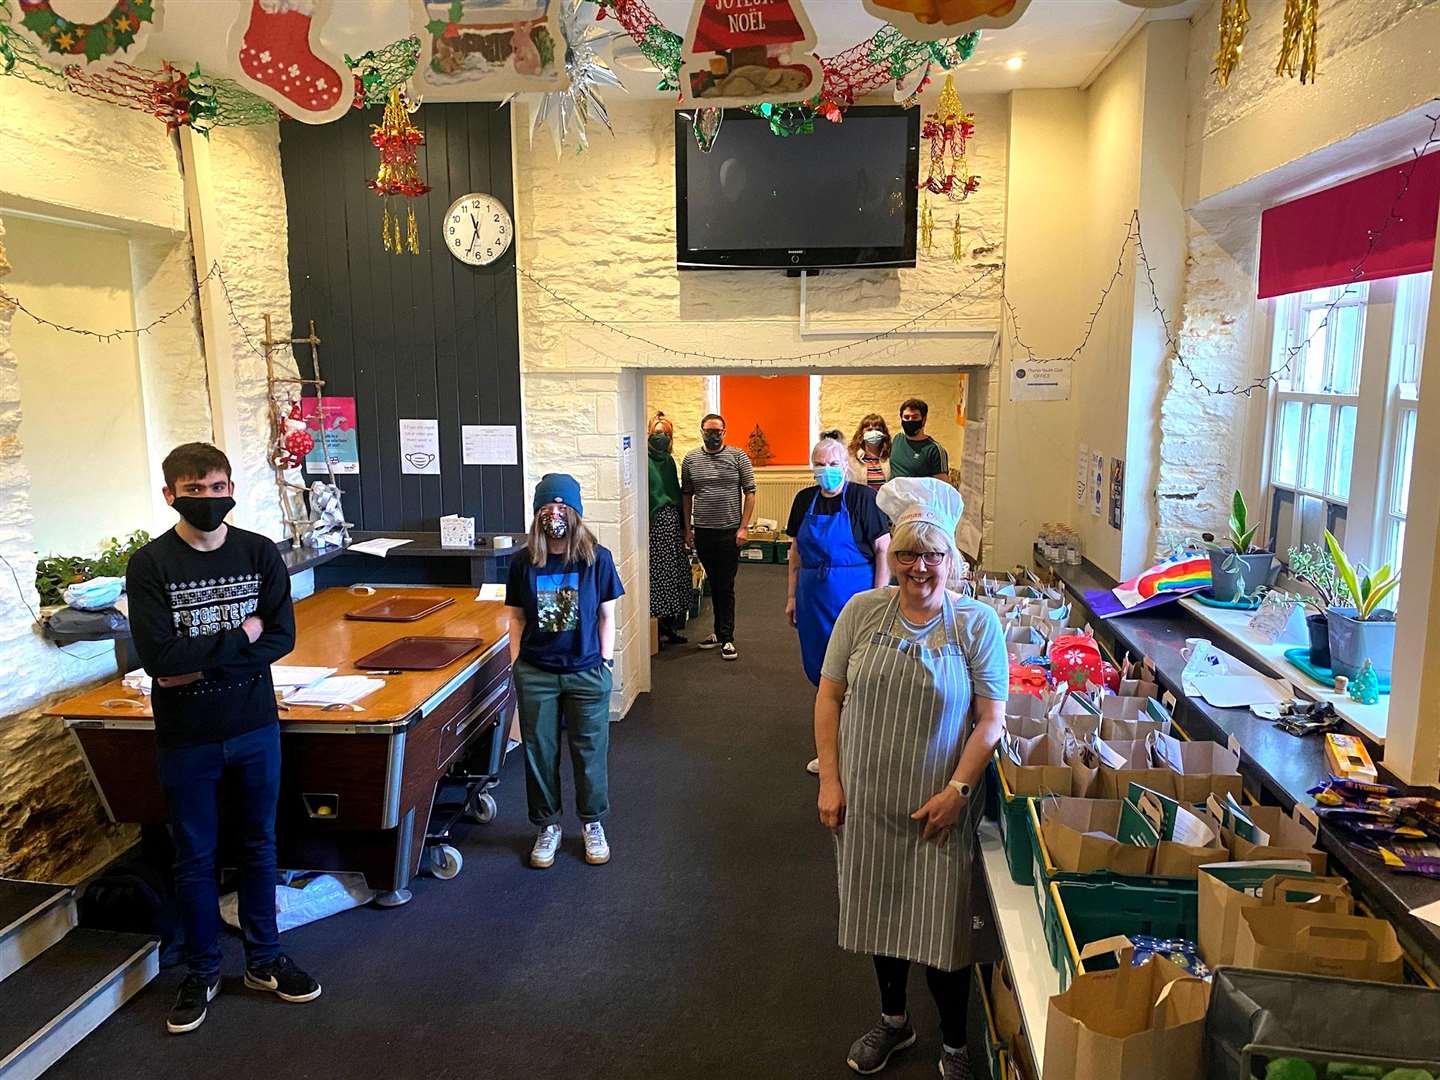 Volunteers on the day cooking and serving. Pictured (from left to right) are Sean Simpson, Jodi Budge, Zoe Mackenzie, Alister Allan, Bethany Lawrie, Tony Mayberry, Helen Allan and cook Lynda Moran.